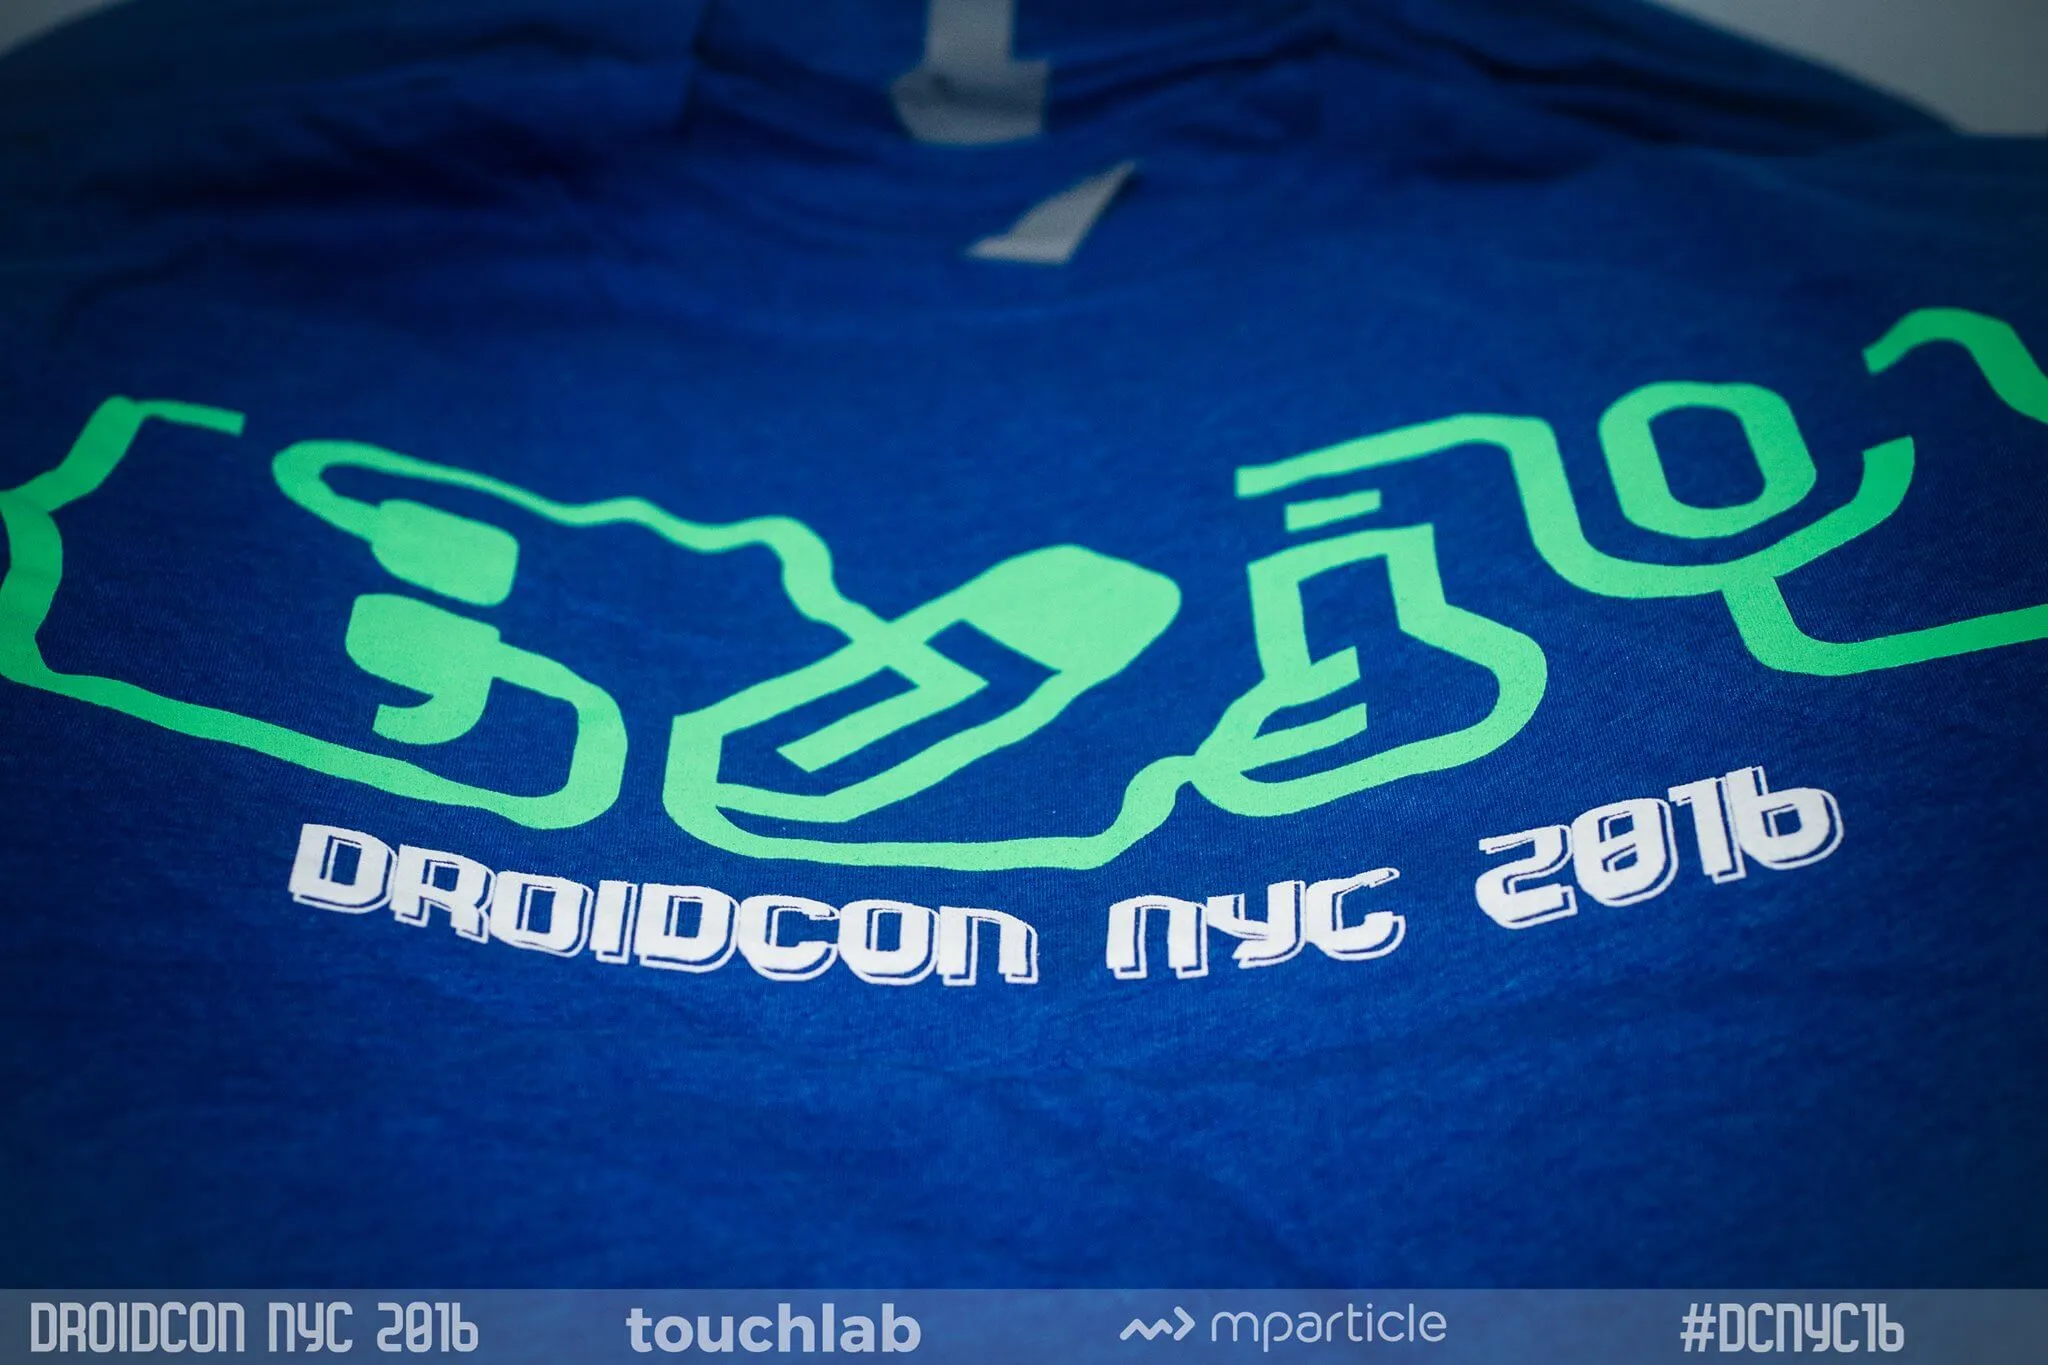 Thank you all for Droidcon NYC 2016